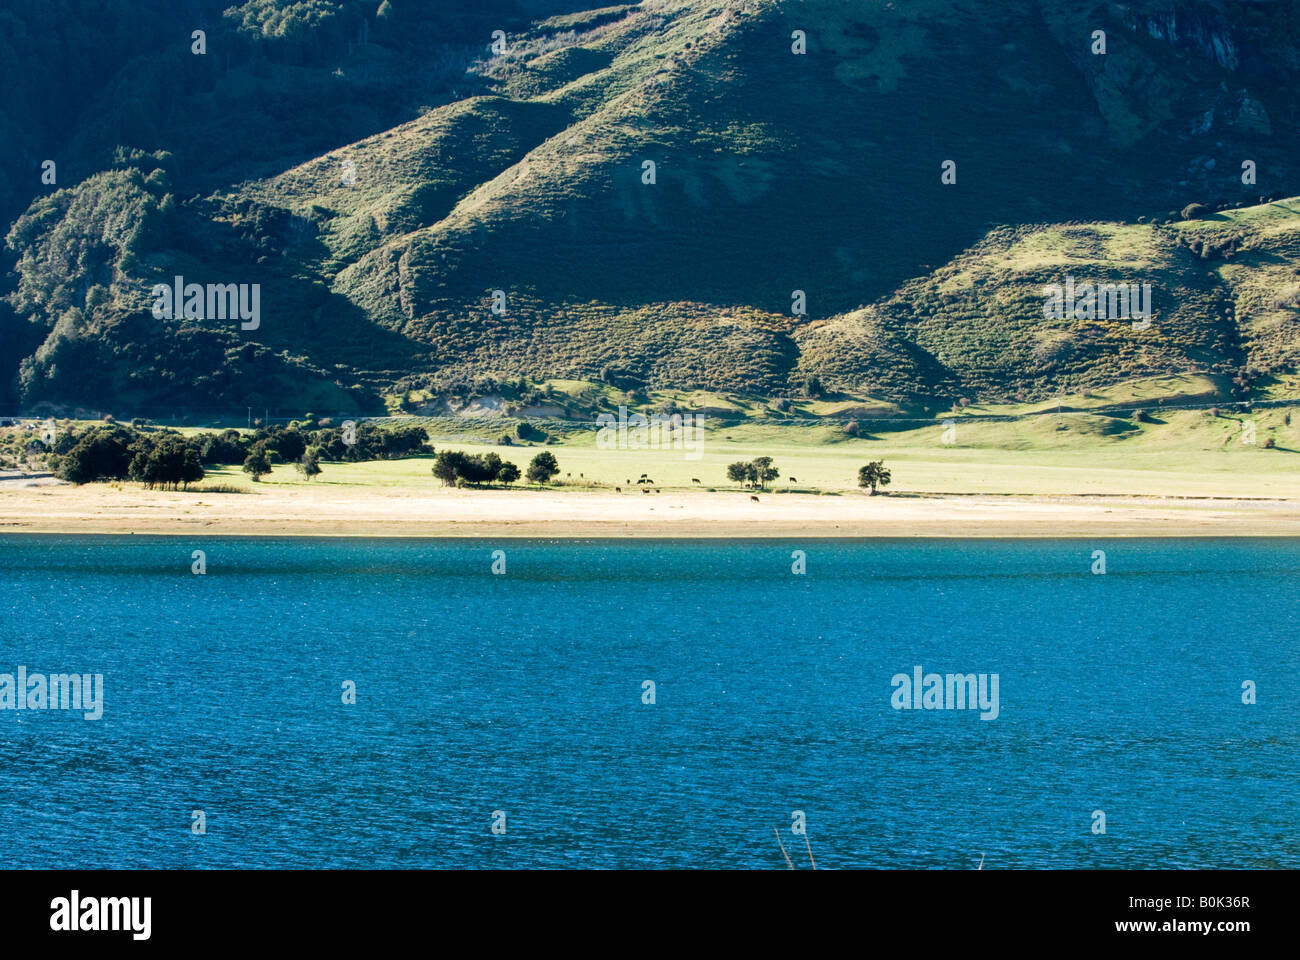 Cattle graze on the shore of Lake Hawea, Central Otago, New Zealand Stock Photo